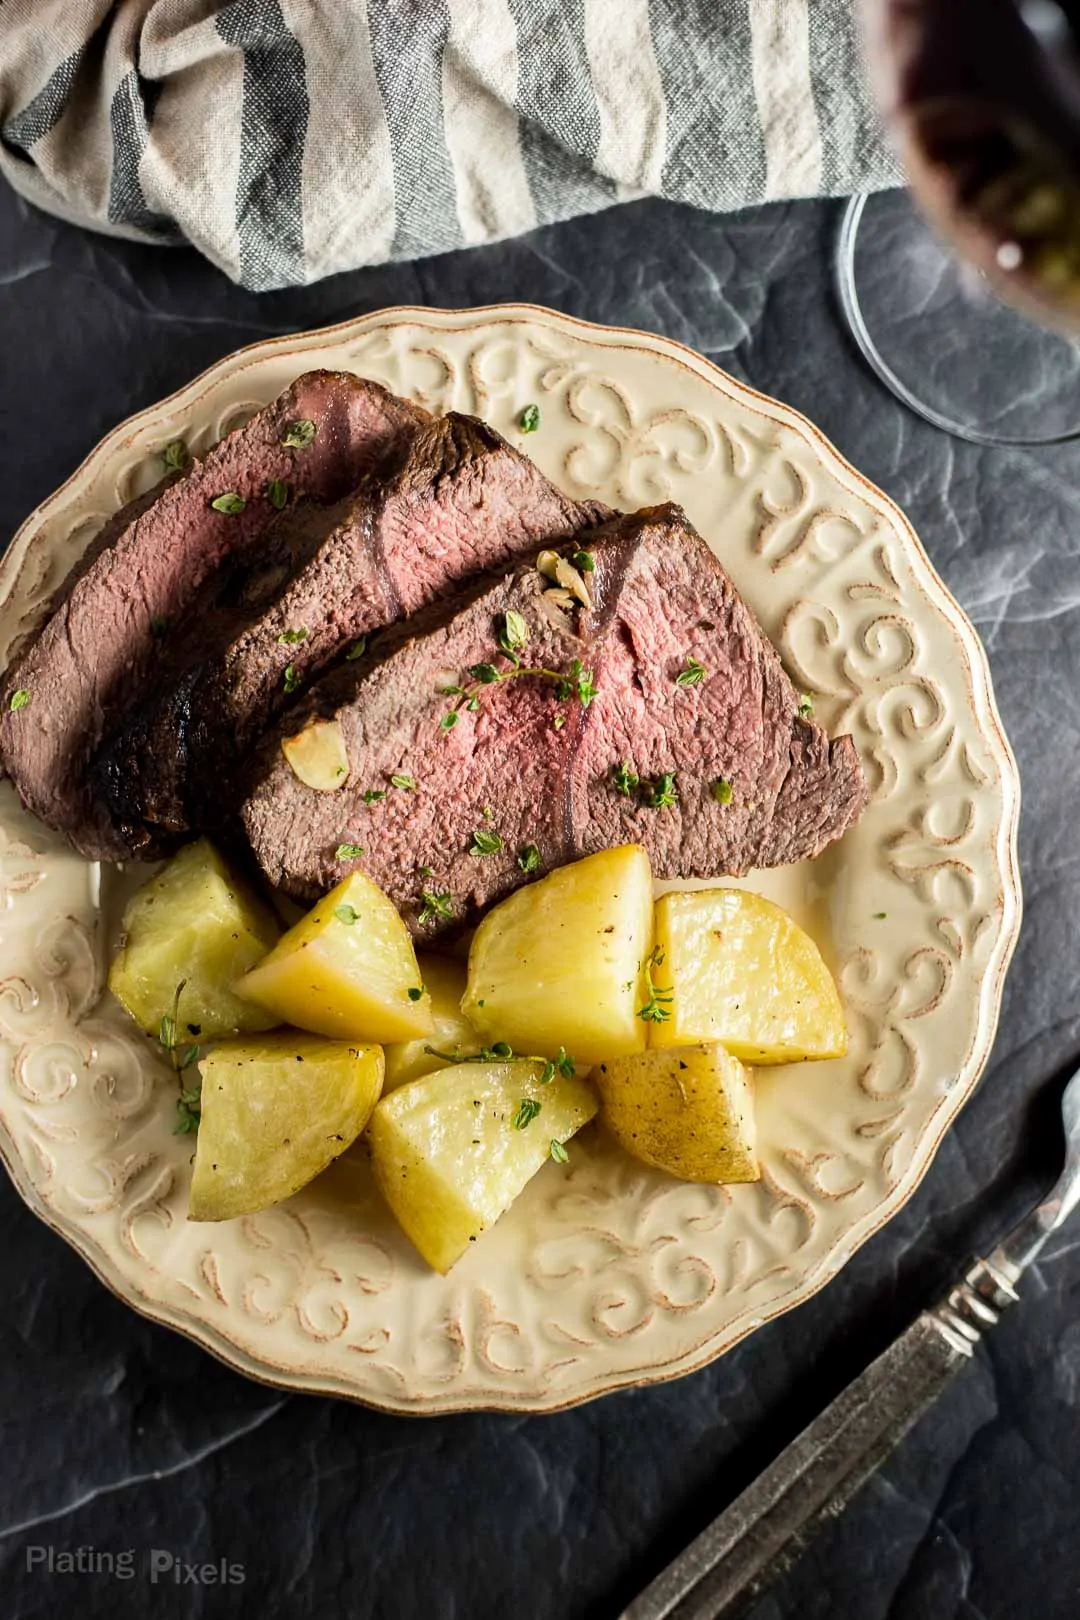 Red Wine Marinated Prime Rib with Potatoes